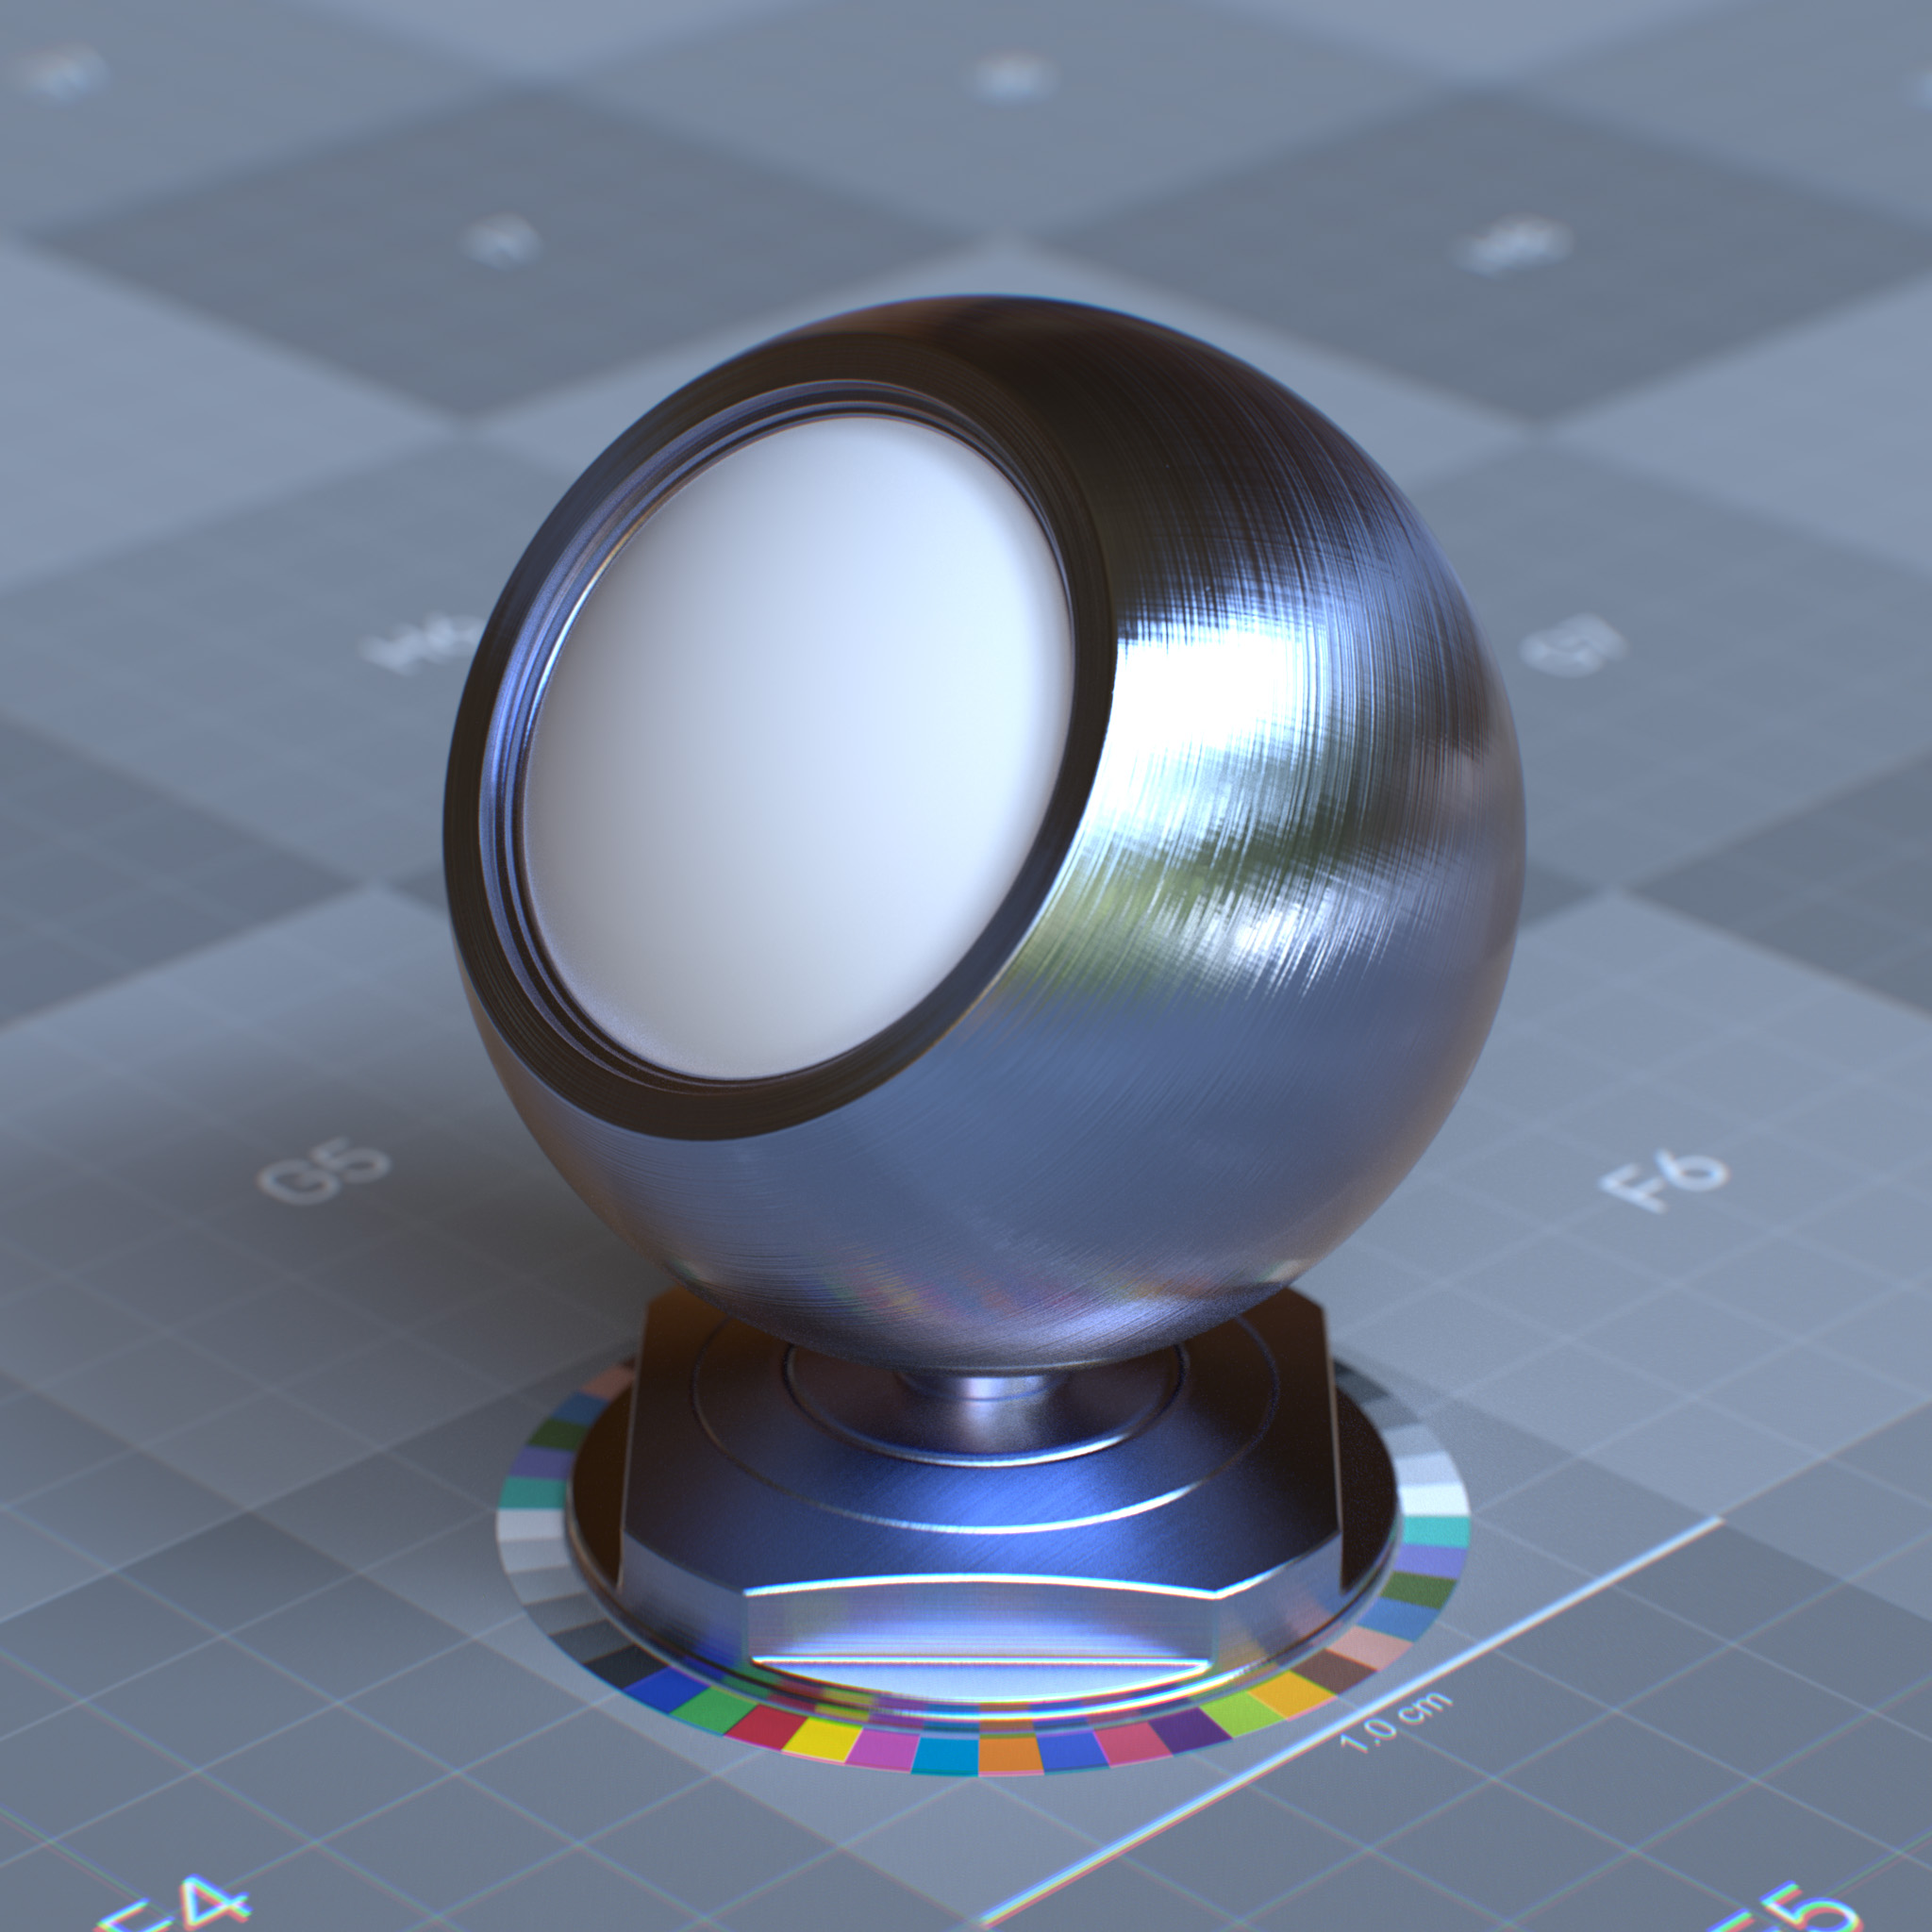 rtx_material_omnisurfacebase_specular_reflection_anisotropy_rotation_0p5